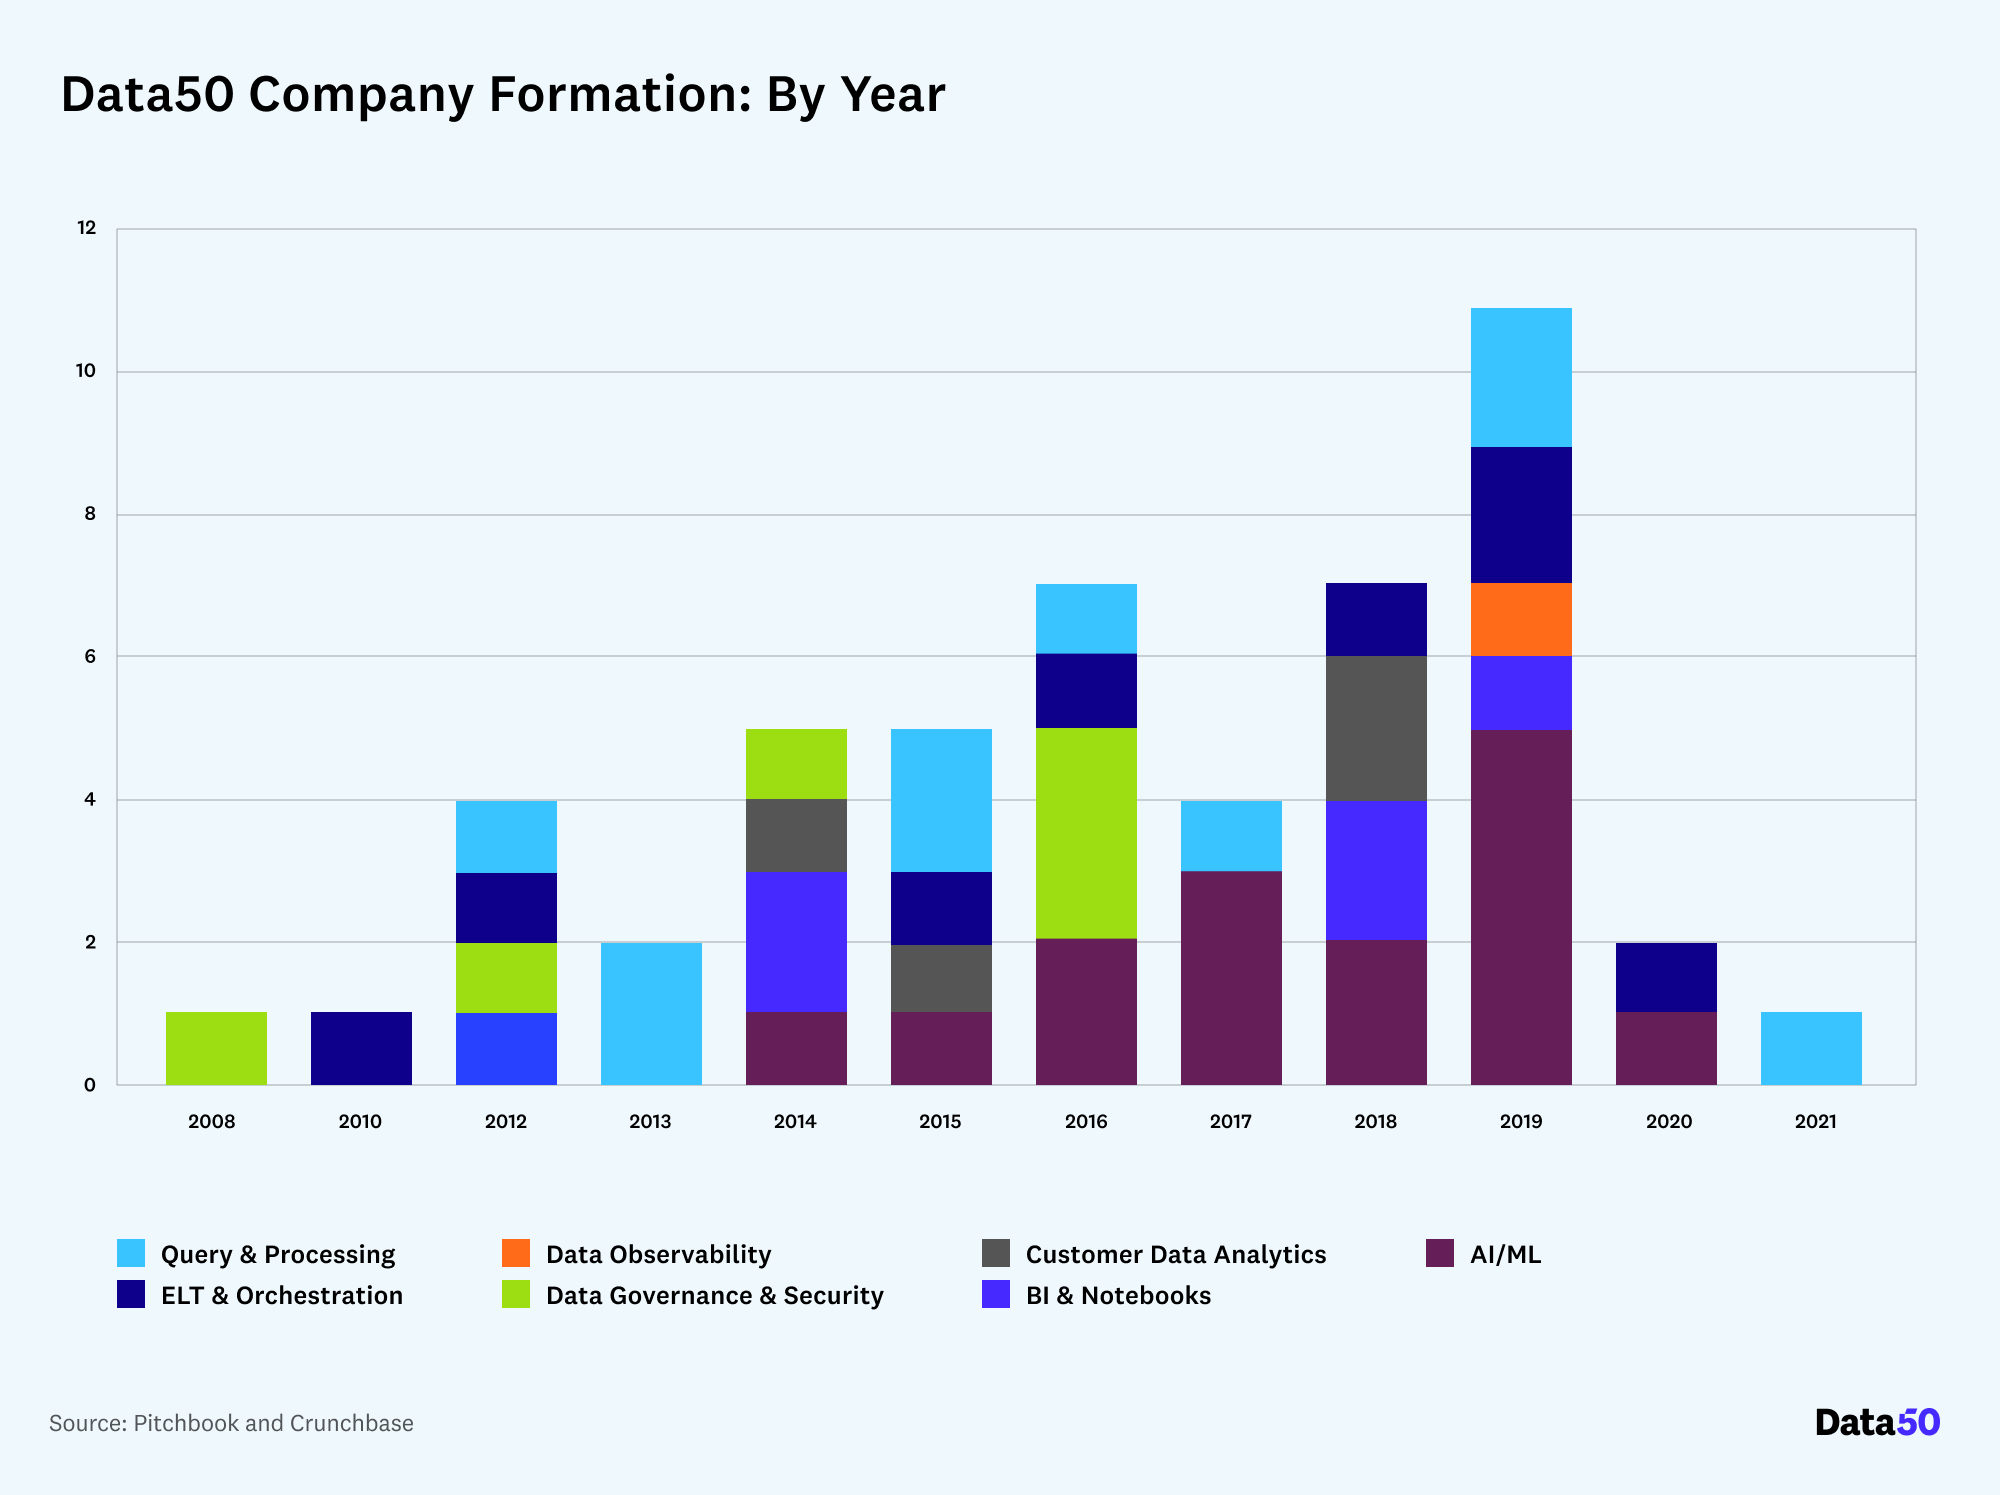 Data50 Company Formation by Year